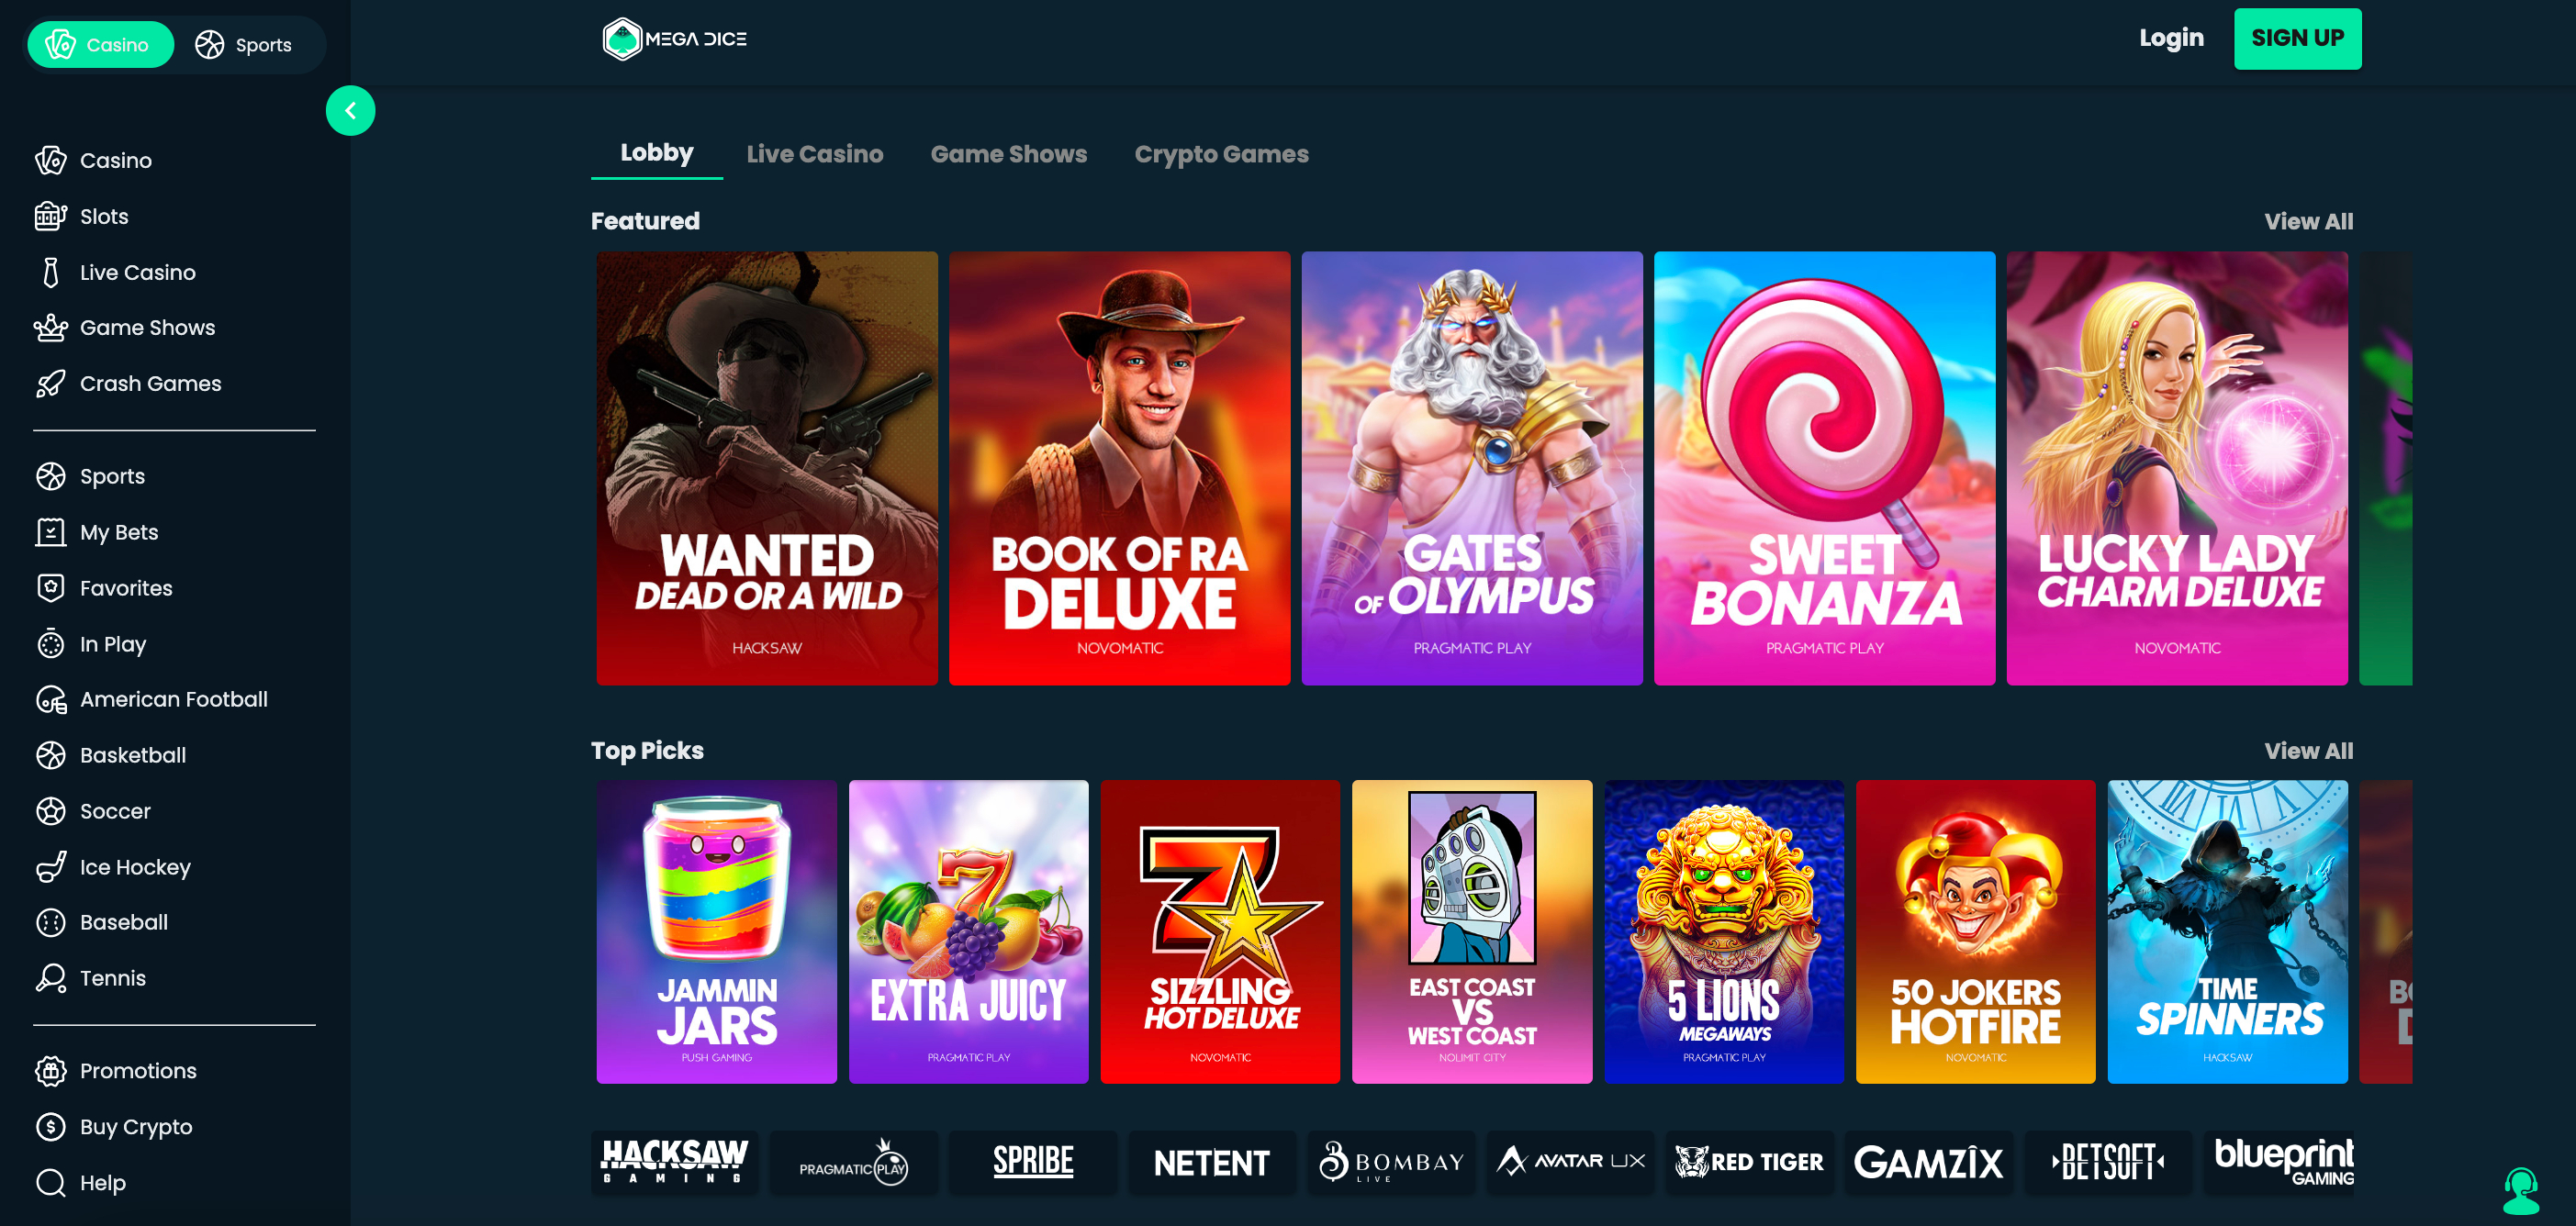 Mega Dice online casino and sport betting site